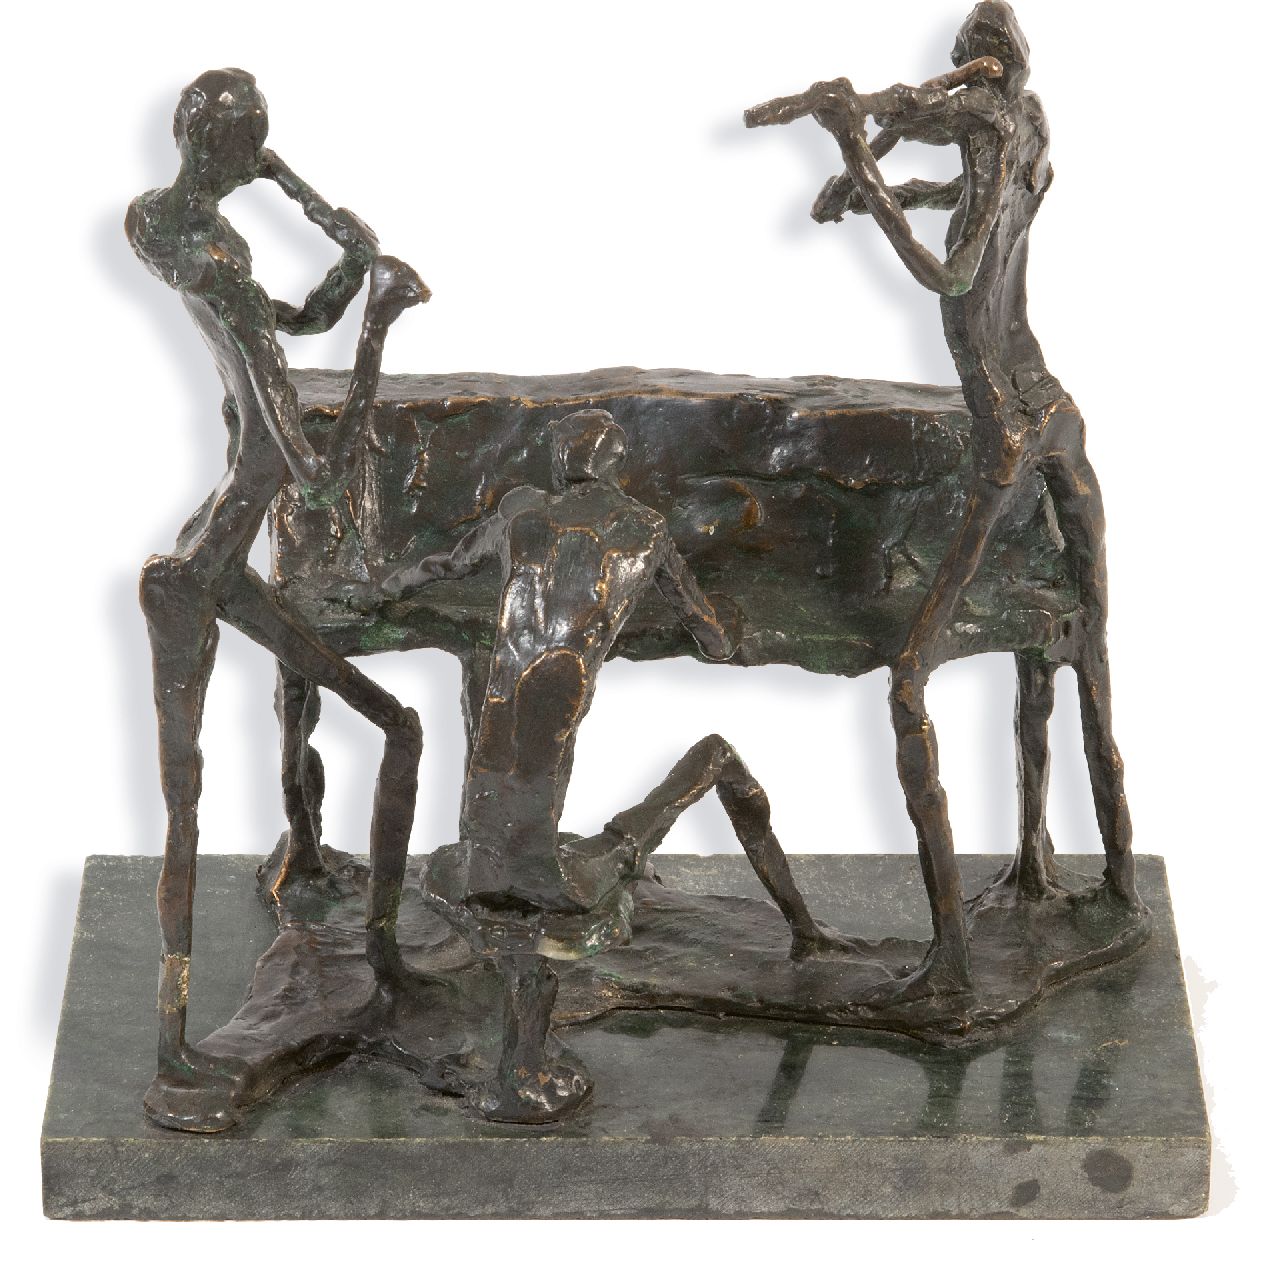 Bakker W.F.  | Willem Frederik 'Jits' Bakker | Sculptures and objects offered for sale | the concert, bronze 21.0 x 21.1 cm, signed on the base with initials